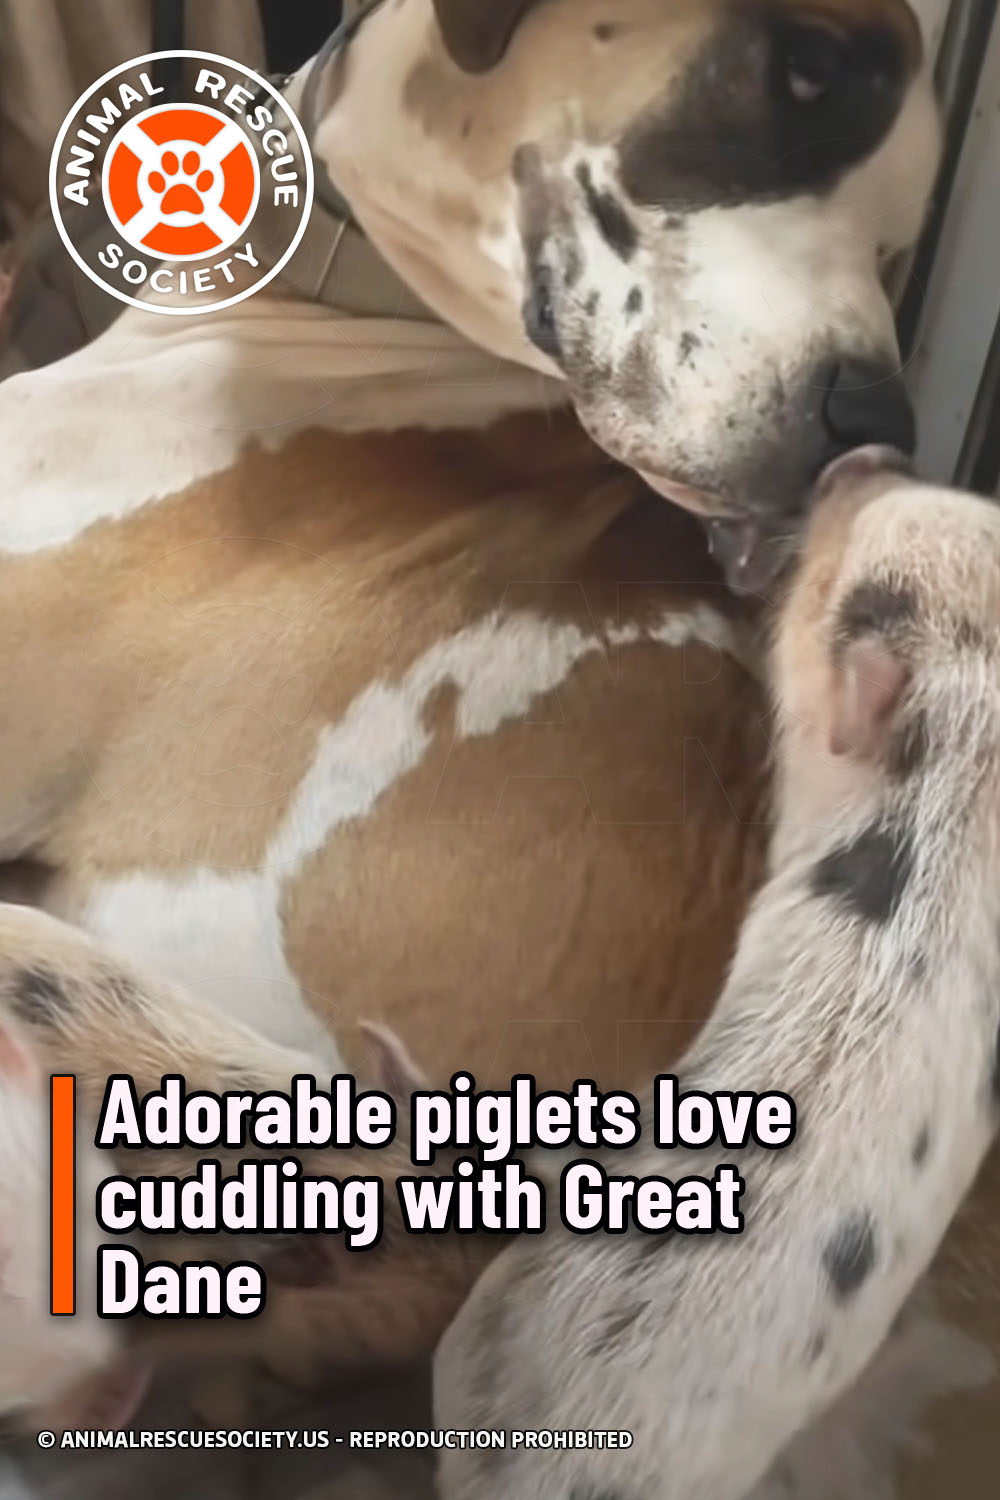 Adorable piglets love cuddling with Great Dane